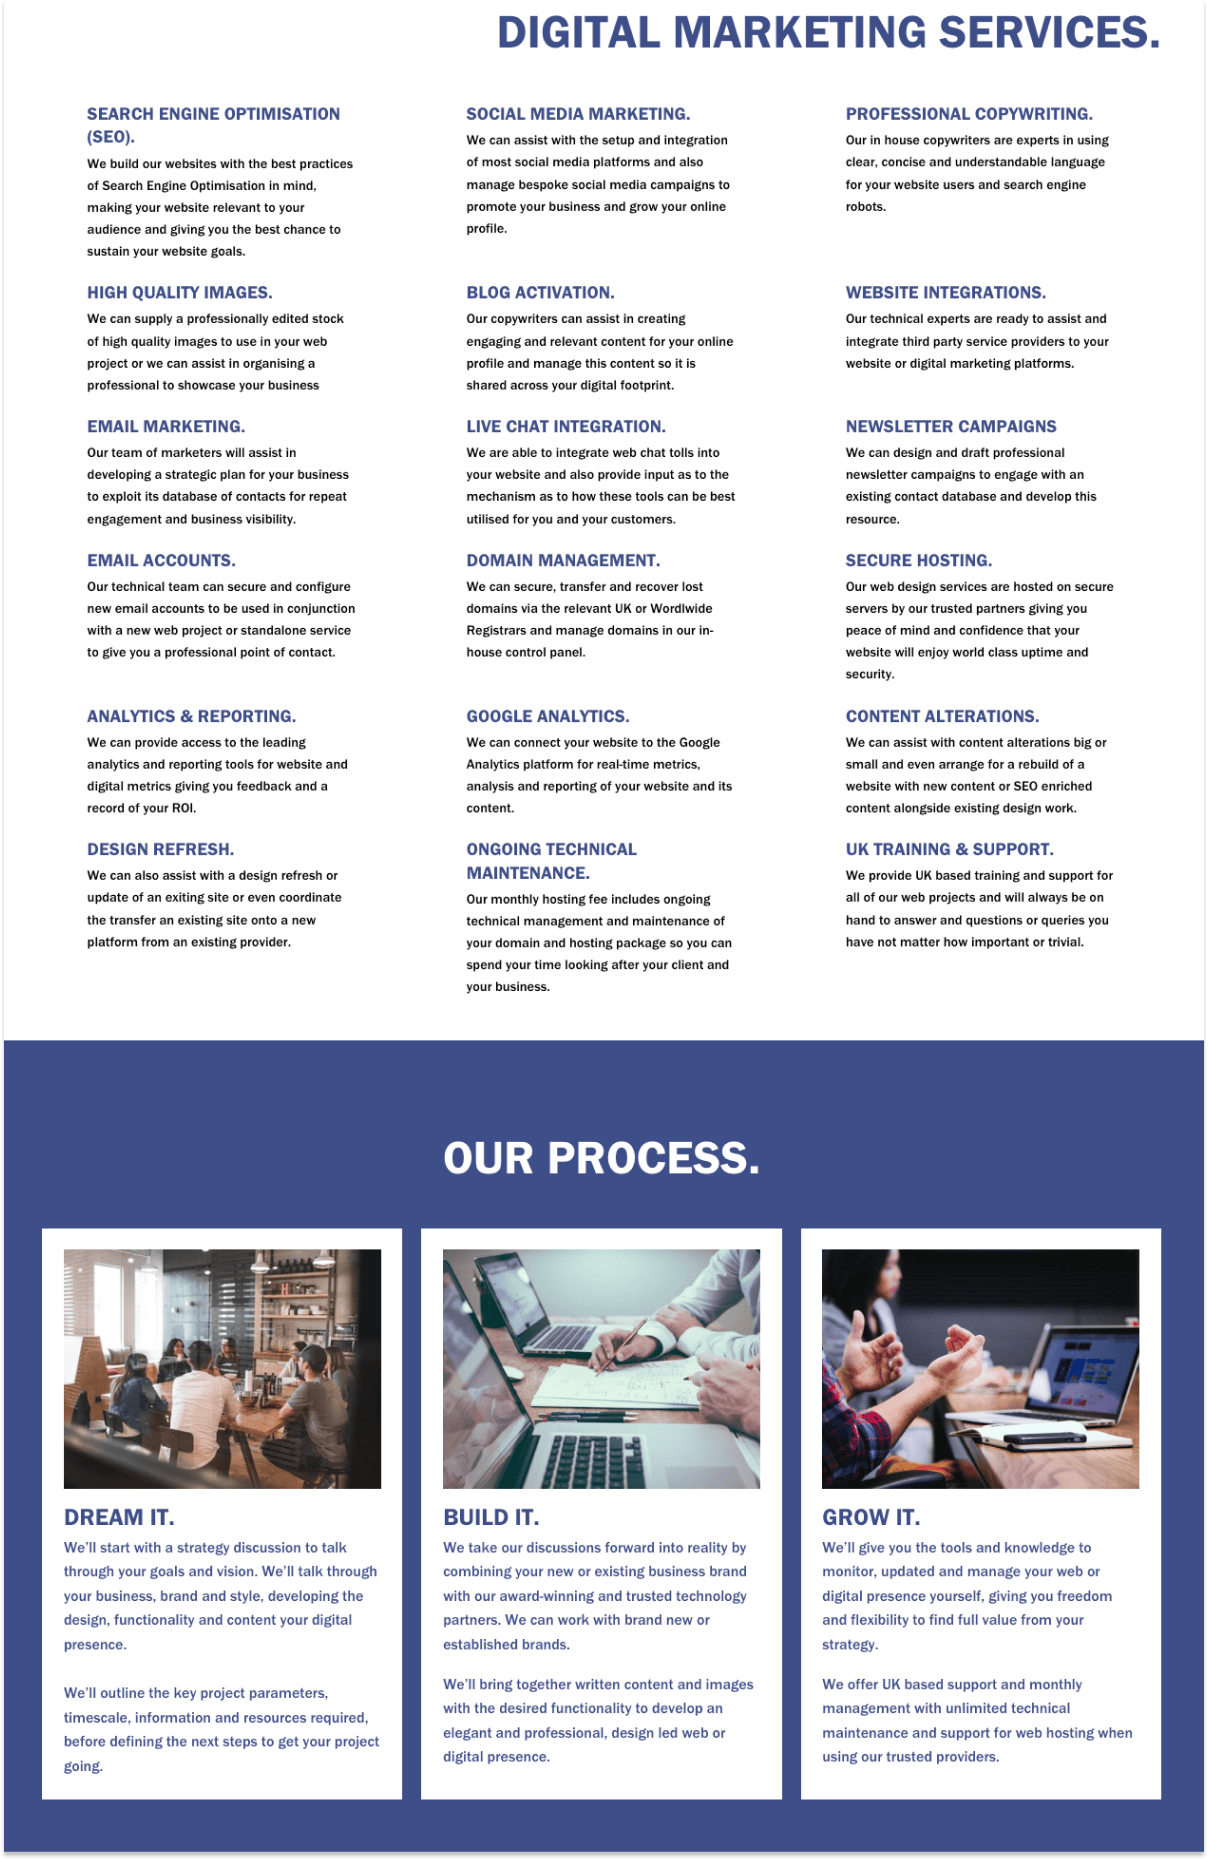 All of Bluebottle's services and process